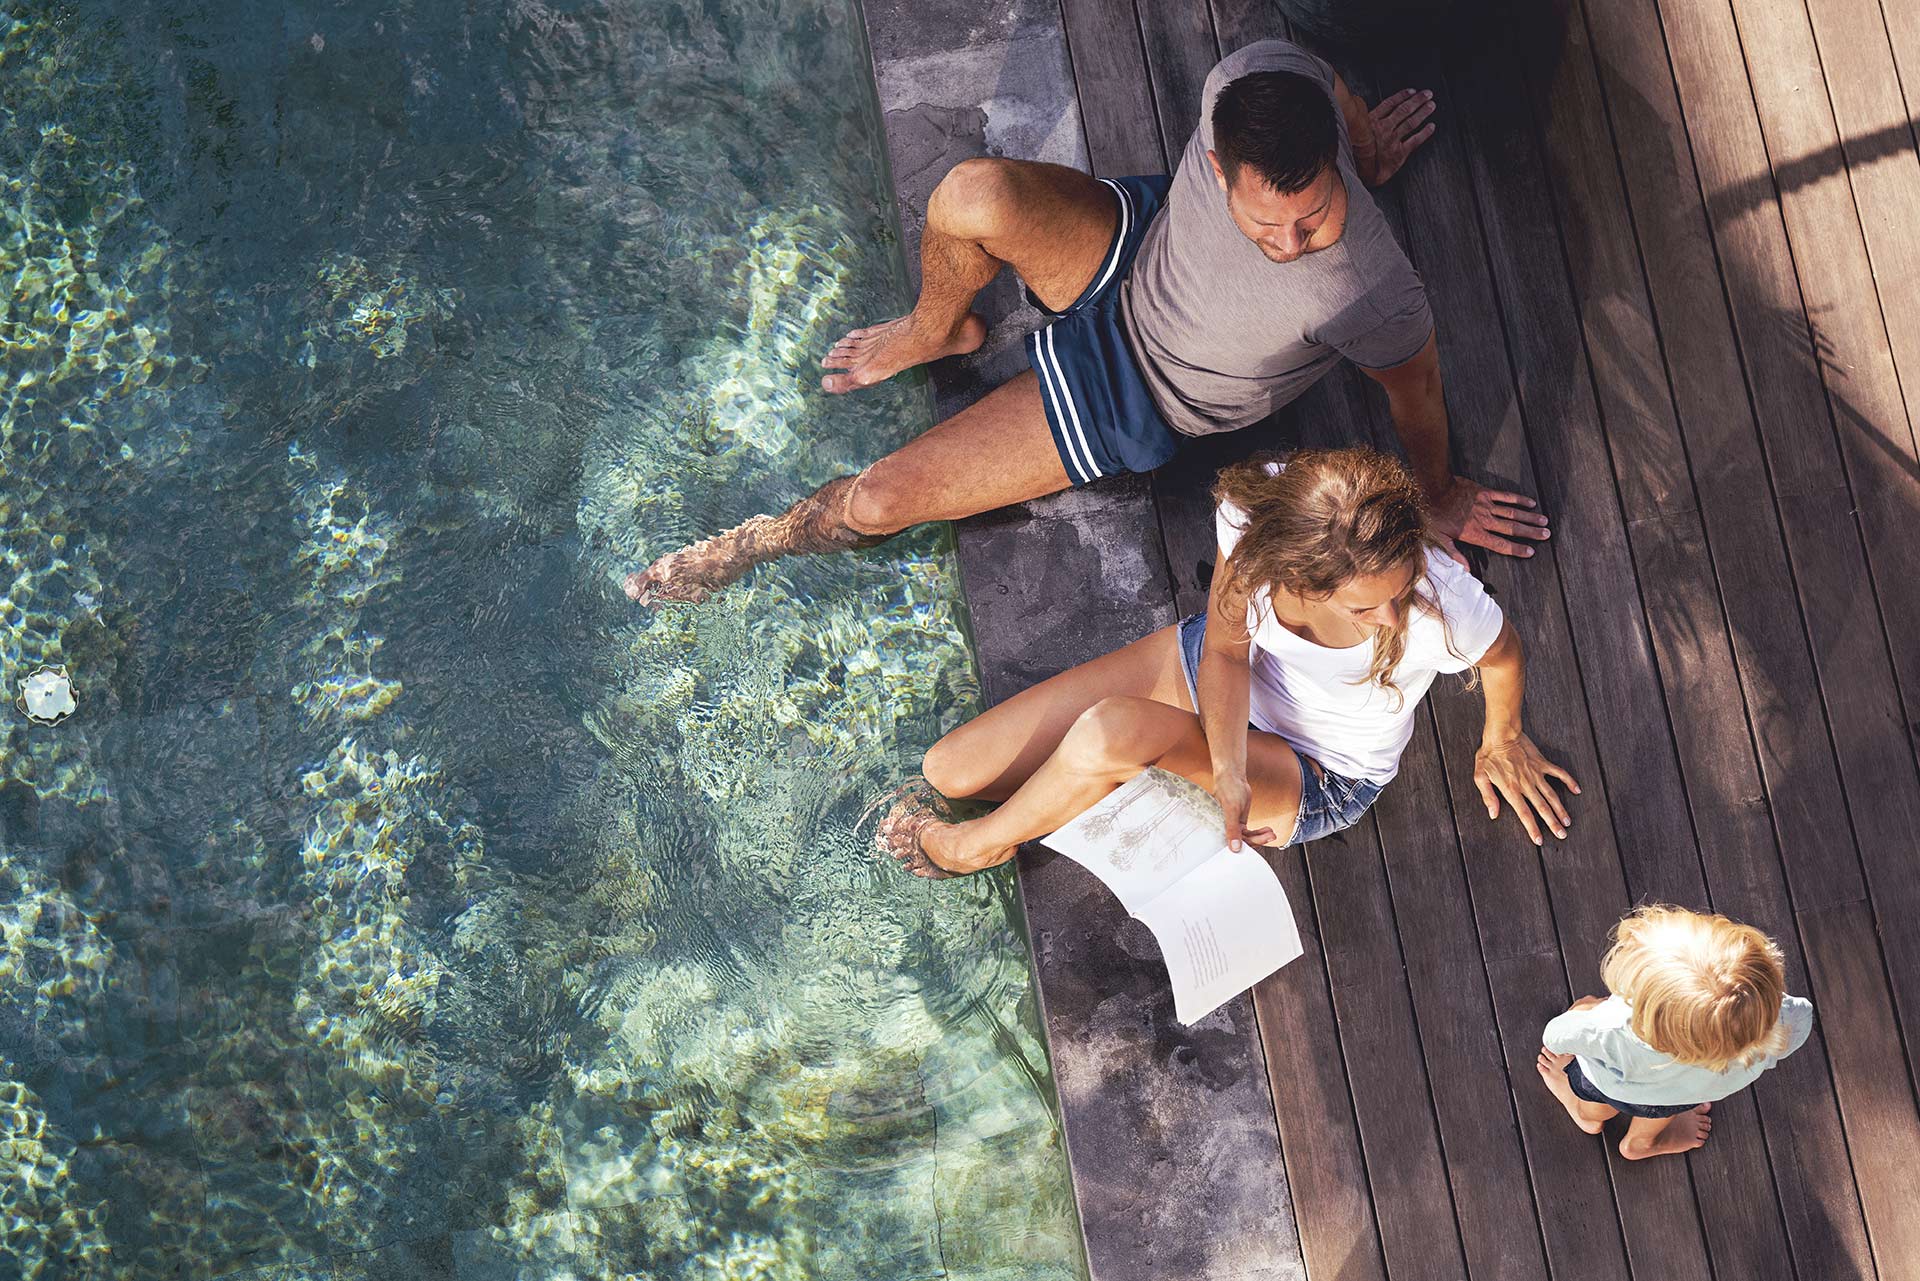 , image shows a family sitting on wooden decking with their feet in the water, reading to a young child